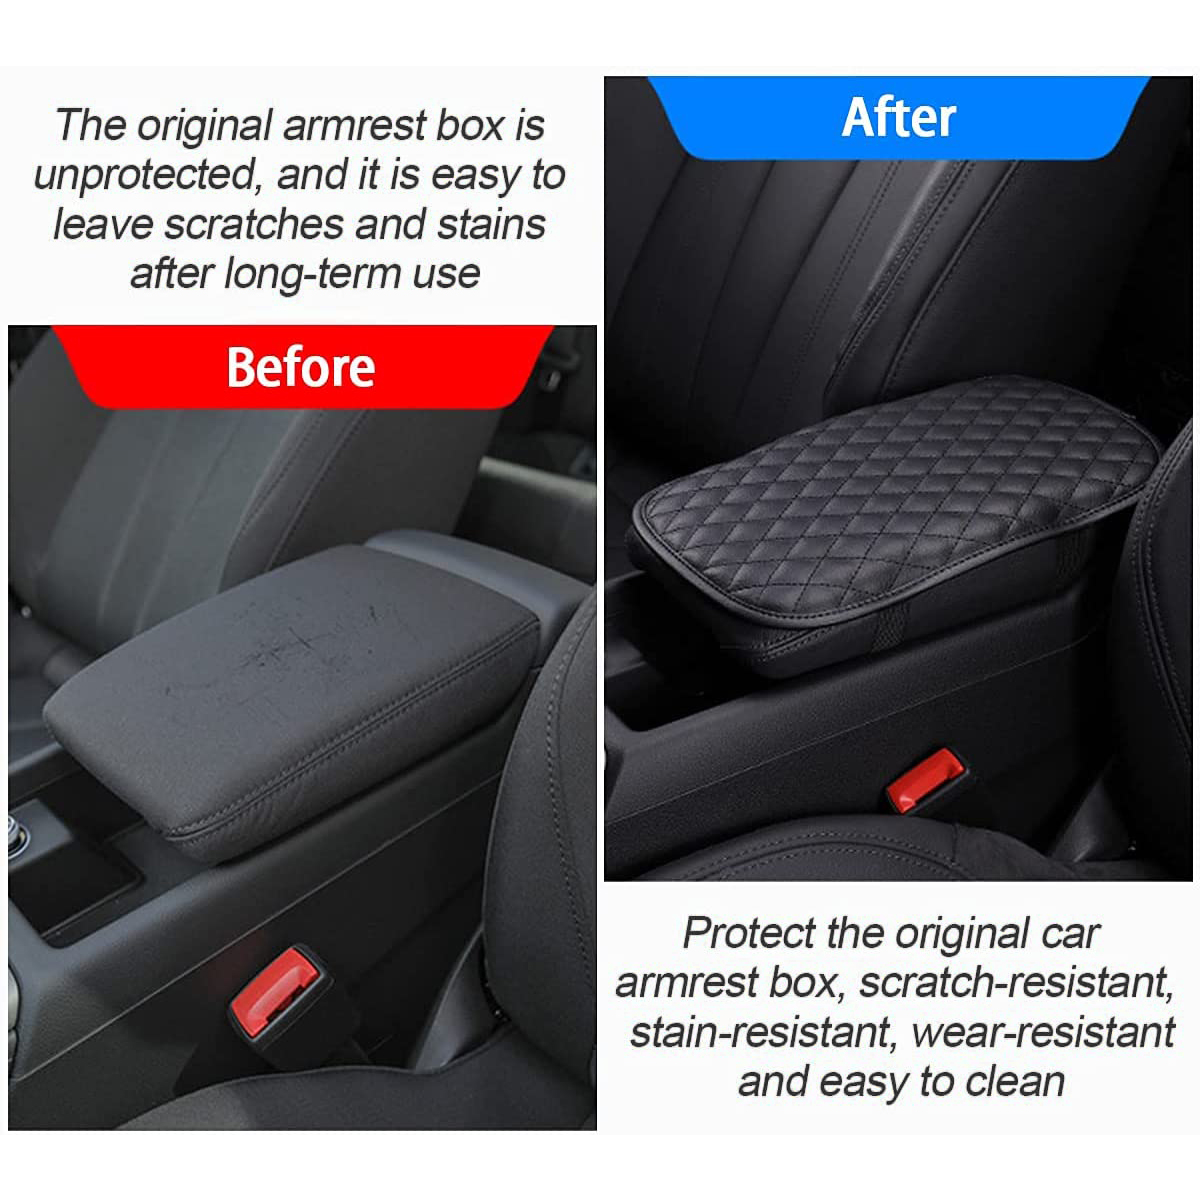 Car Armrest Cover Universal Car Armrest Pad Waterproof Car Center Console Cover 11.8 x 7.87 Inch Car Armrest Seat Box Cover Protector Car Decoration Accessories for Vehicle SUV Truck Car (Black) - image 2 of 8